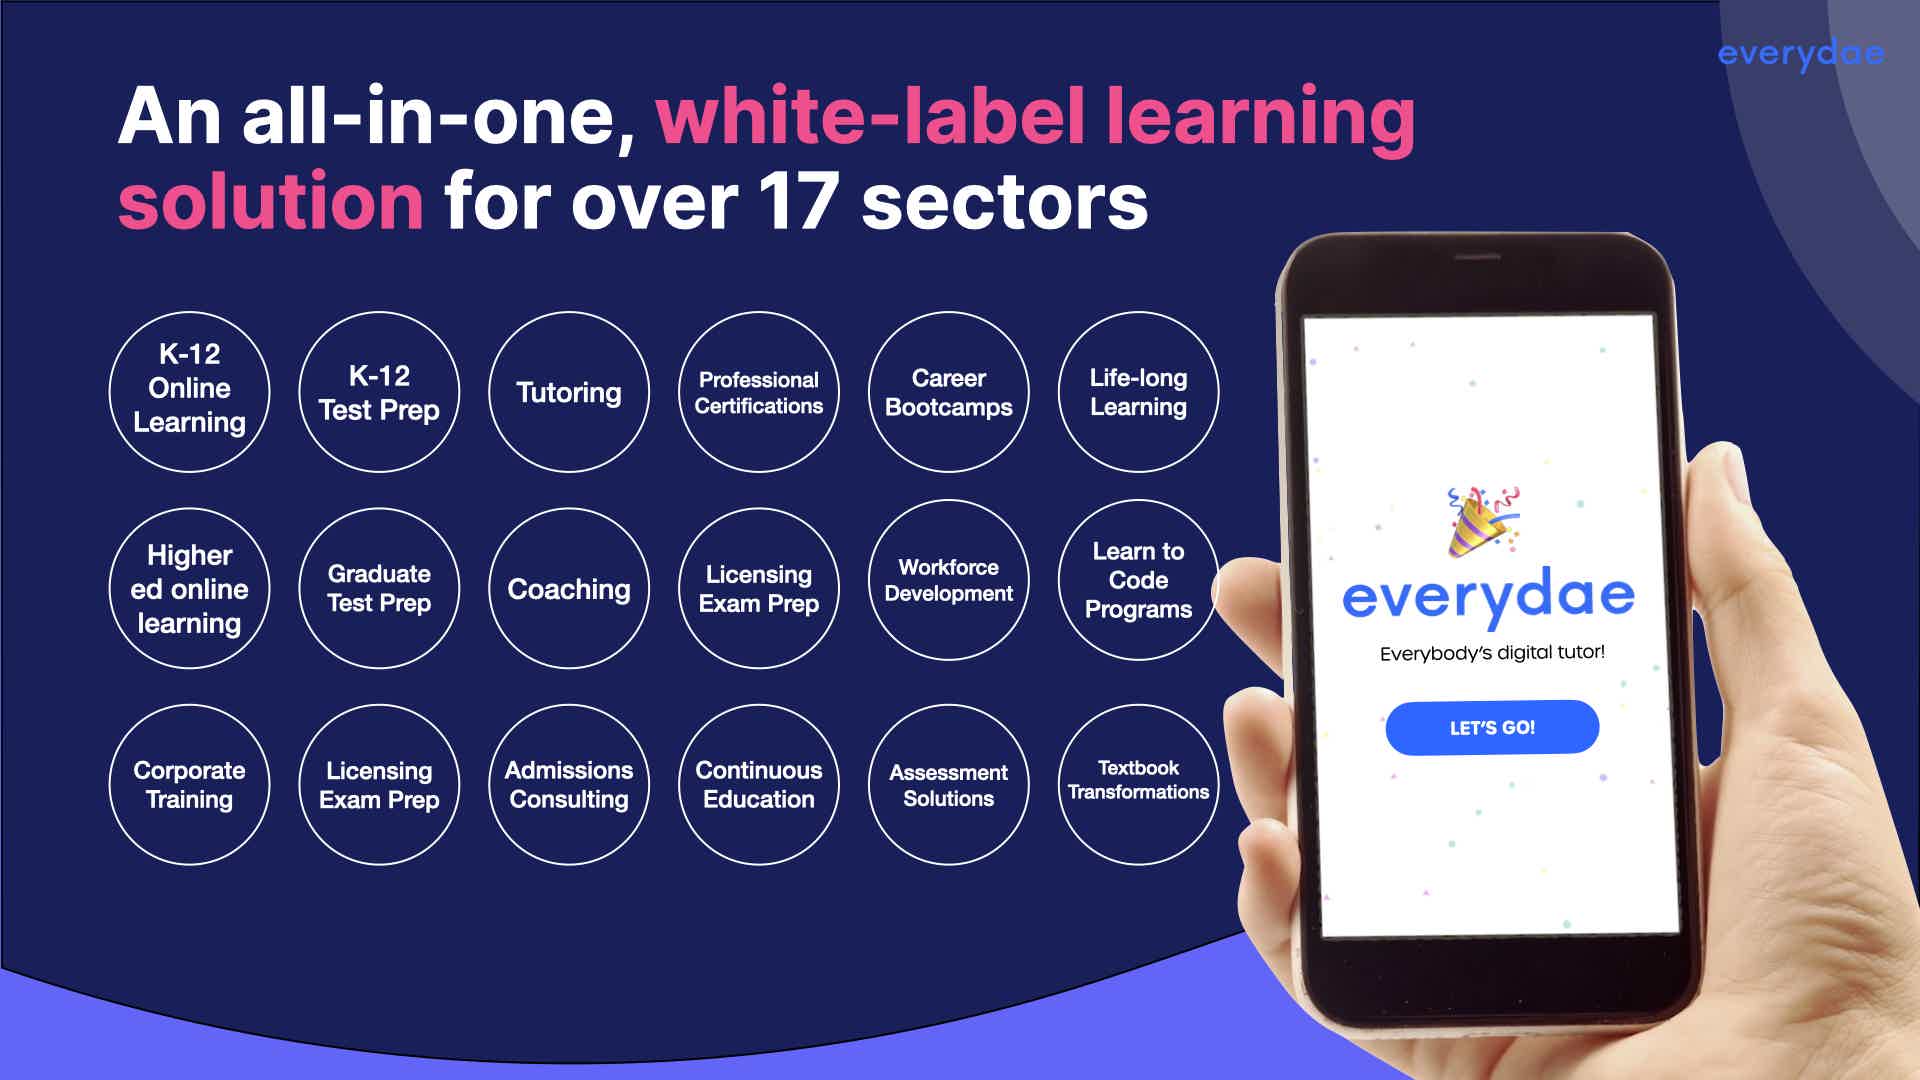 Image showing 17 different education sectors where Everydae can provide a scalable online learning platform. This includes tutoring, test prep, higher education, workforce development etc.